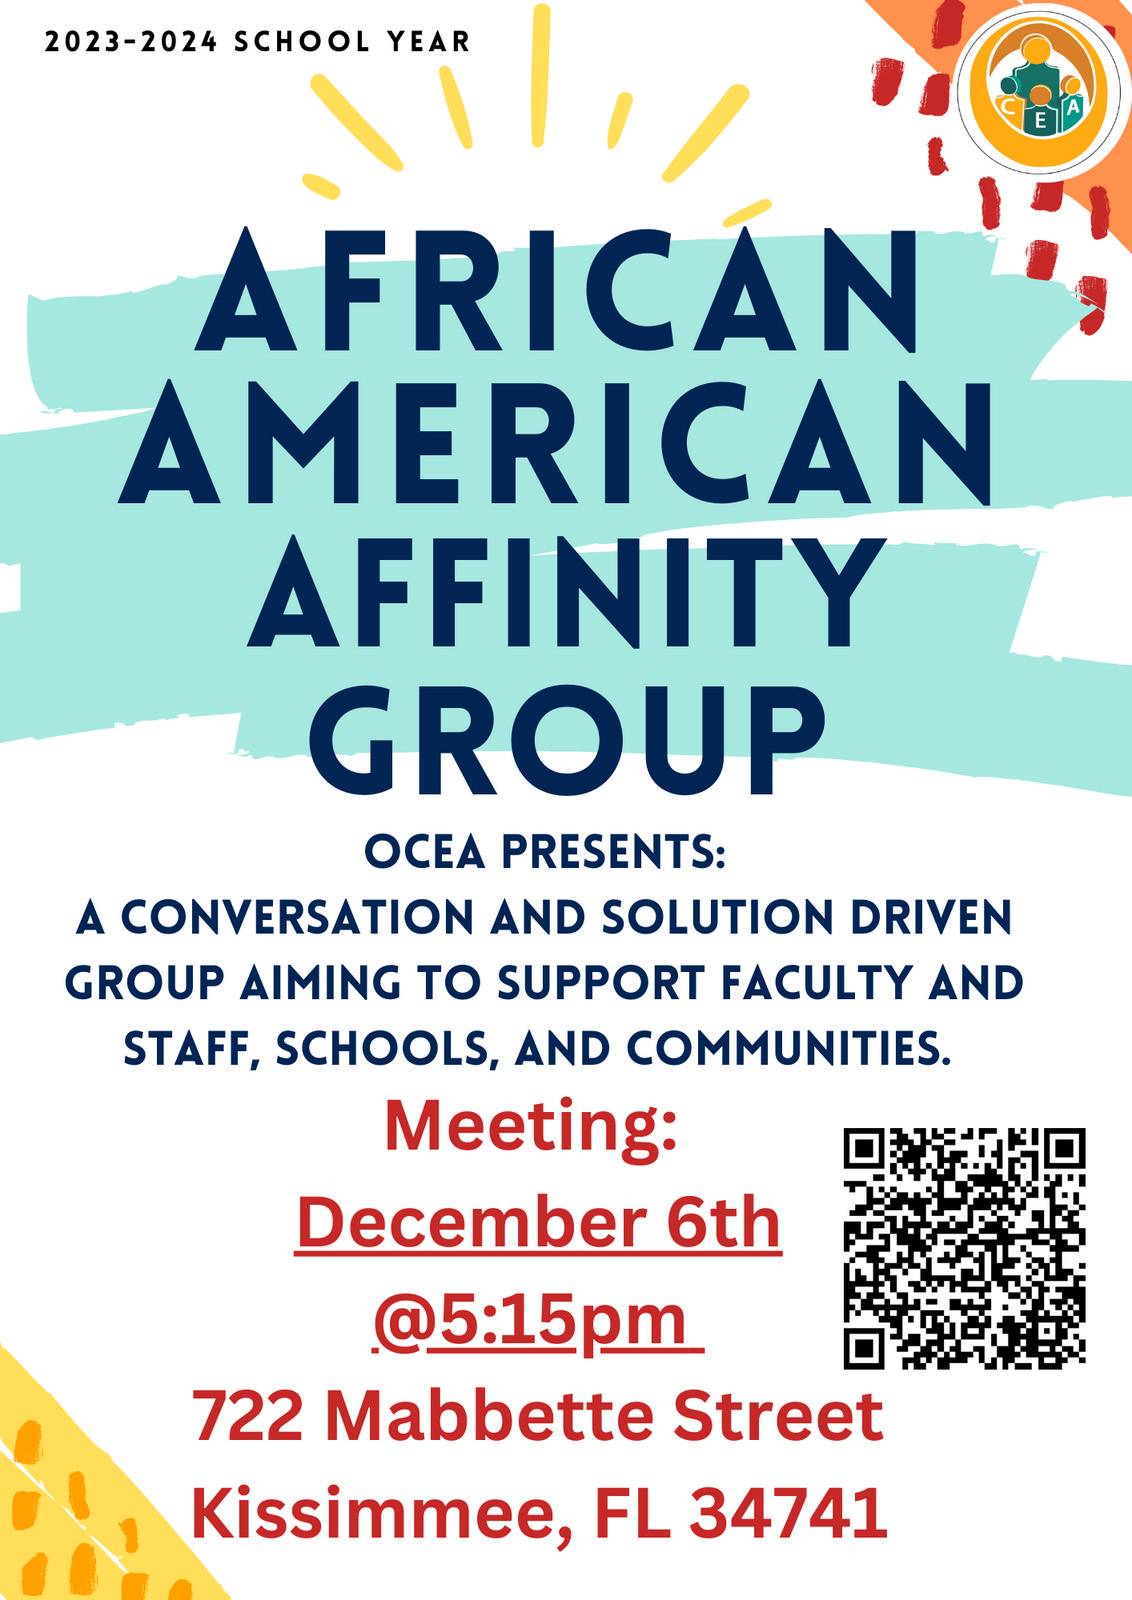 Join us for the African American Affinity Group